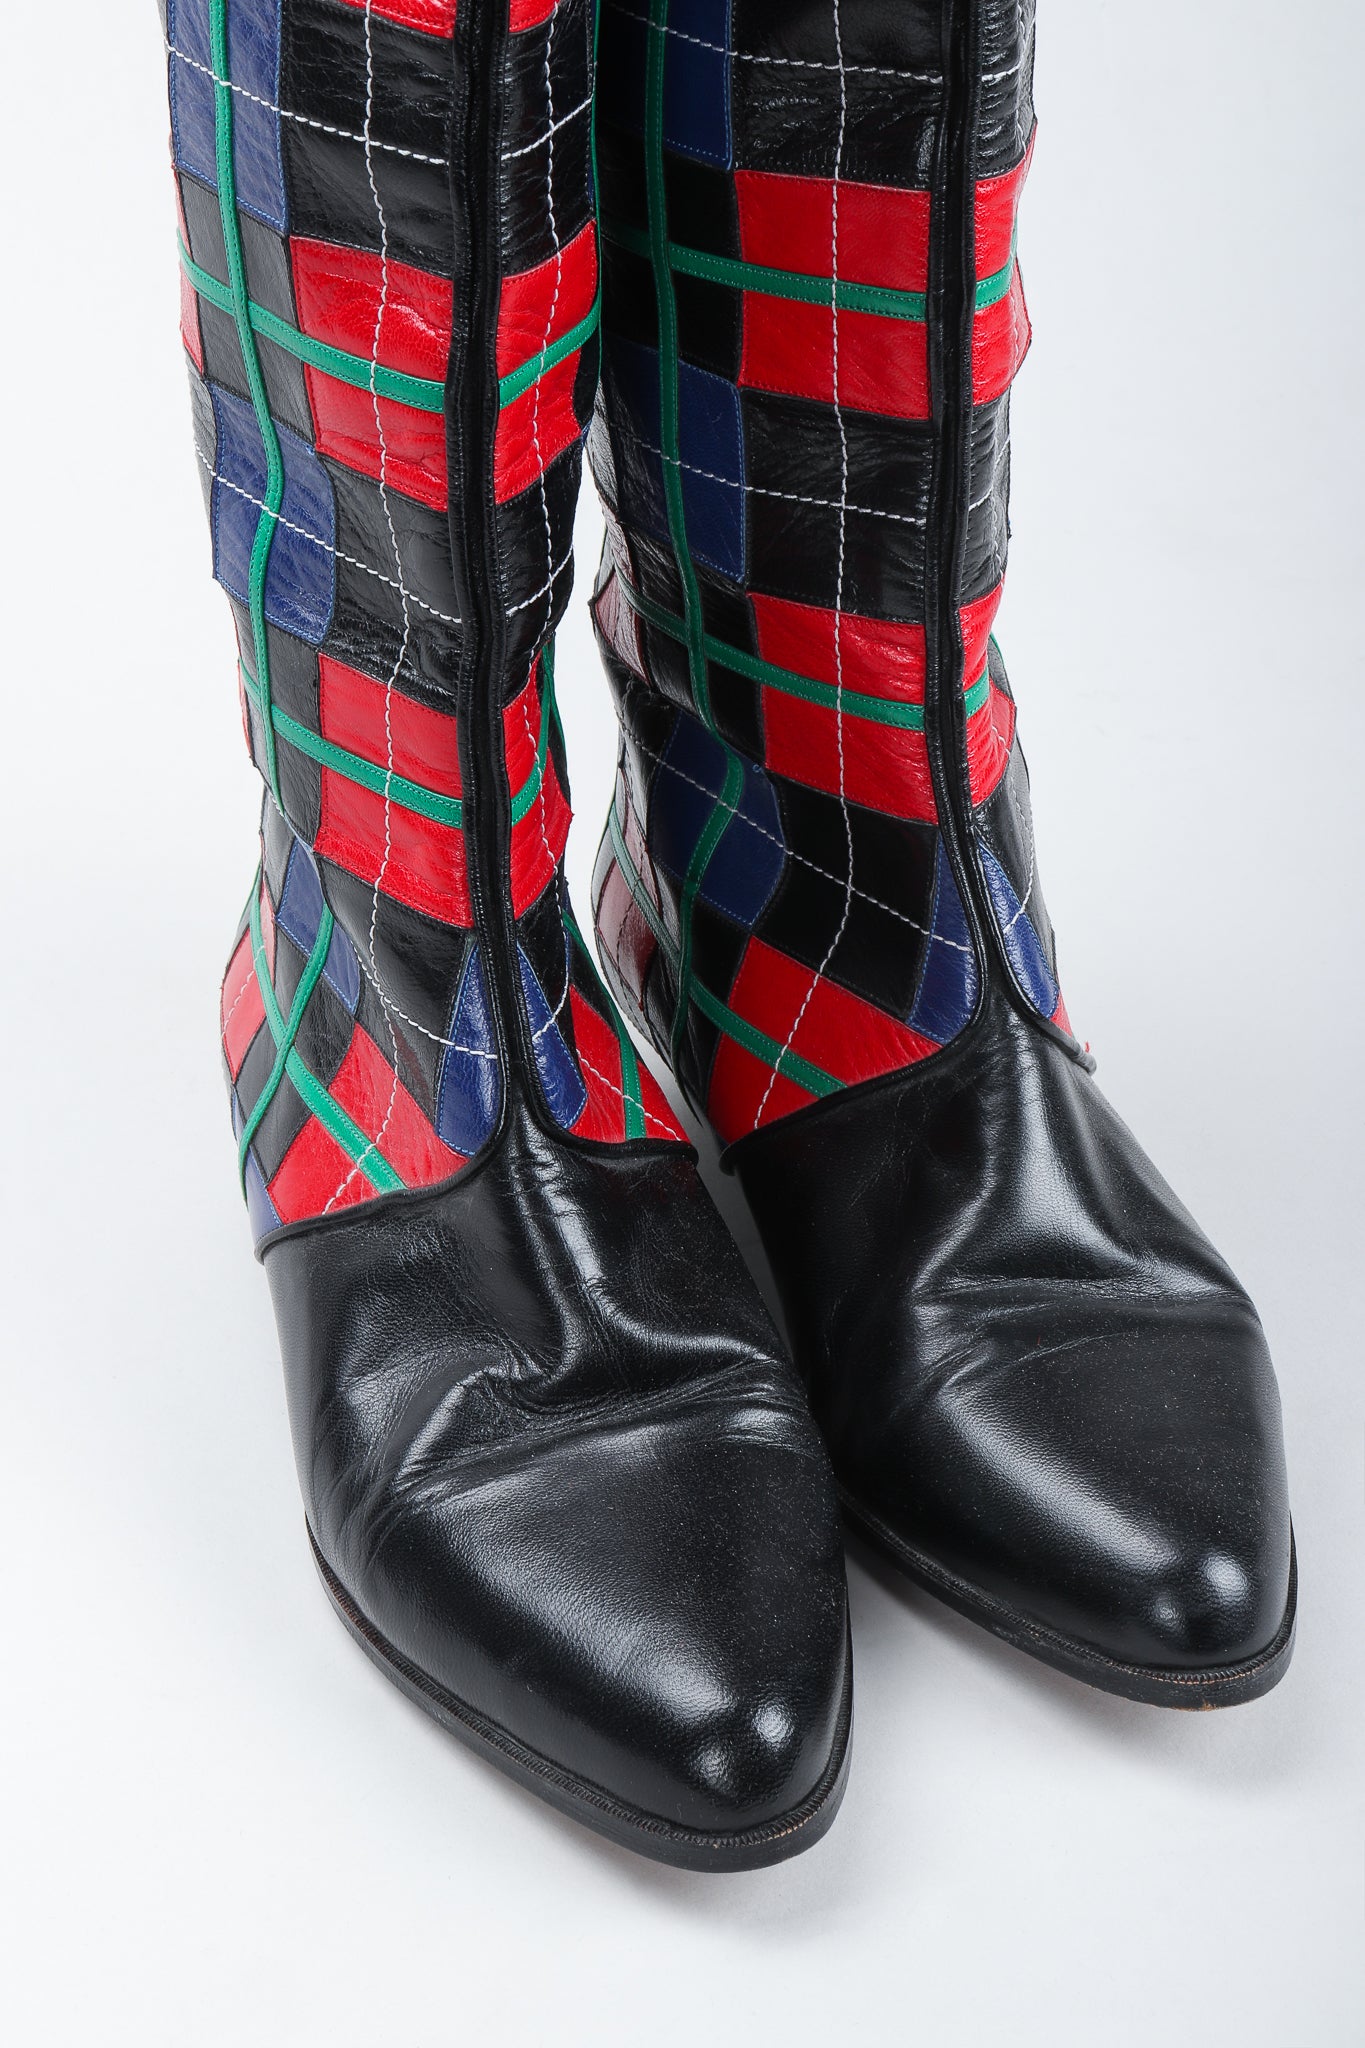 Recess Vintage Andrea Pfister Leather Applique Plaid Boots front toes